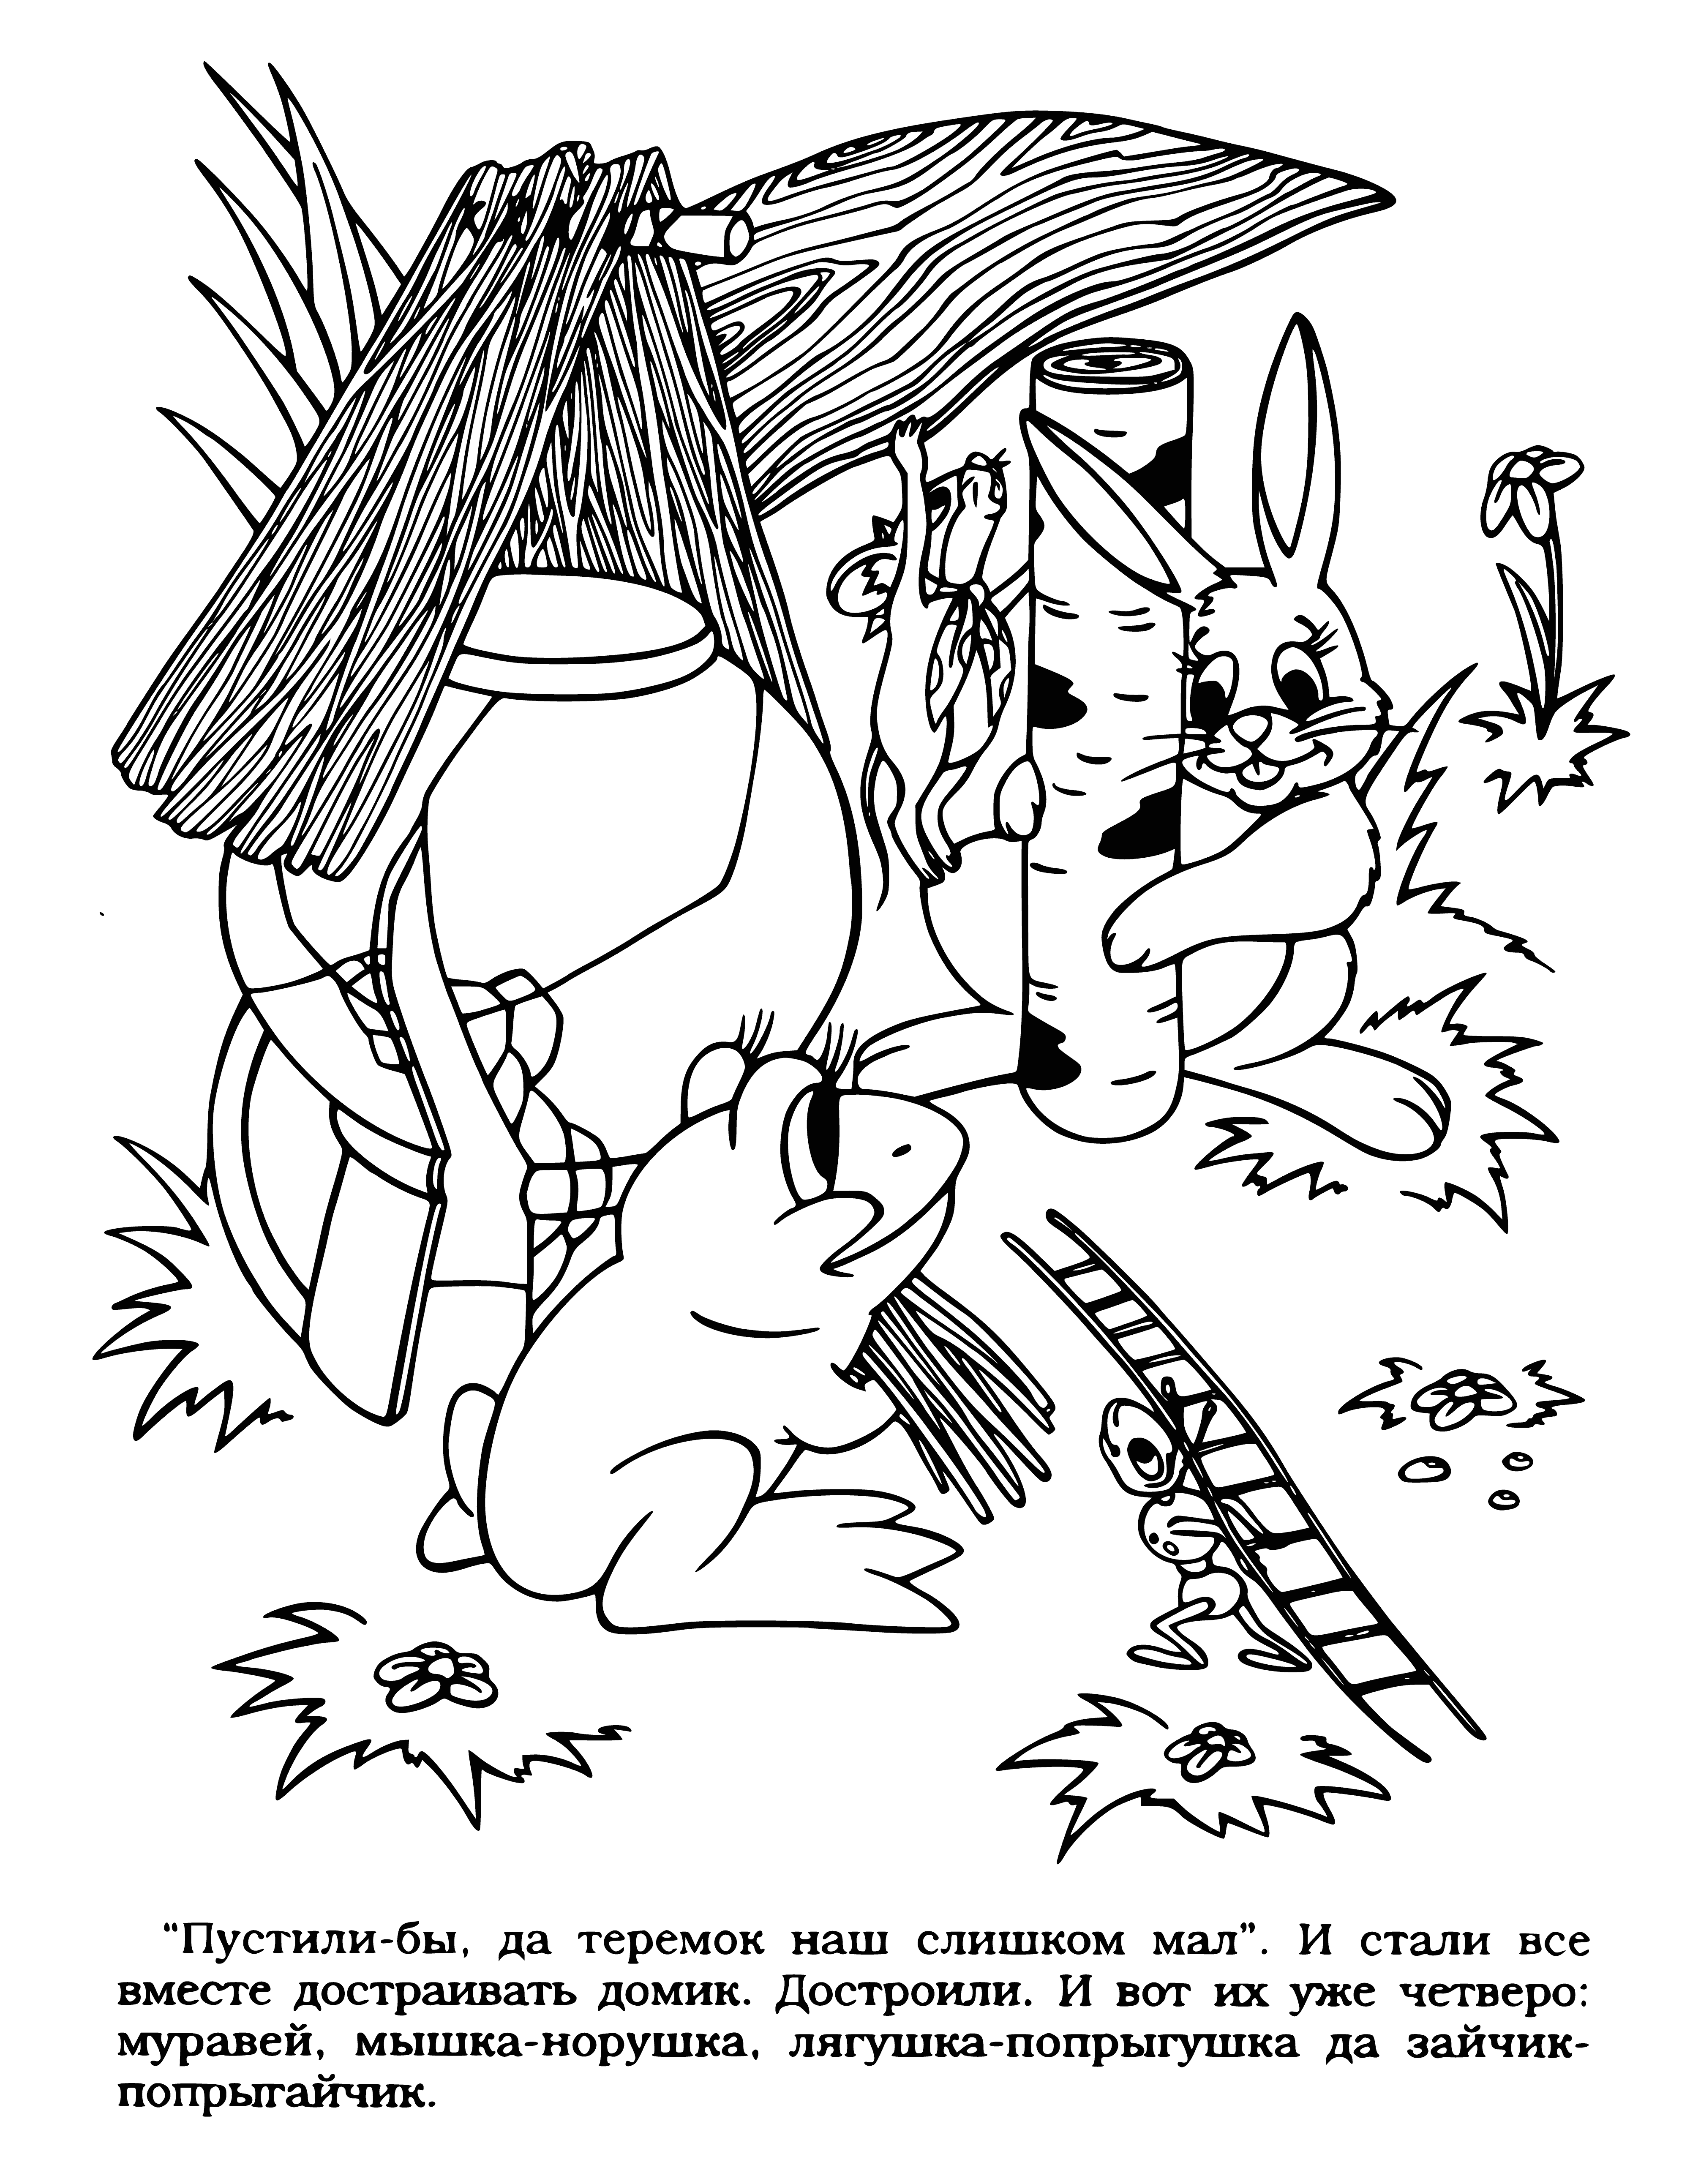 coloring page: A white rabbit in a green field holds a red flower in its mouth. Trees and mountains in the background complete the scene. #folktale